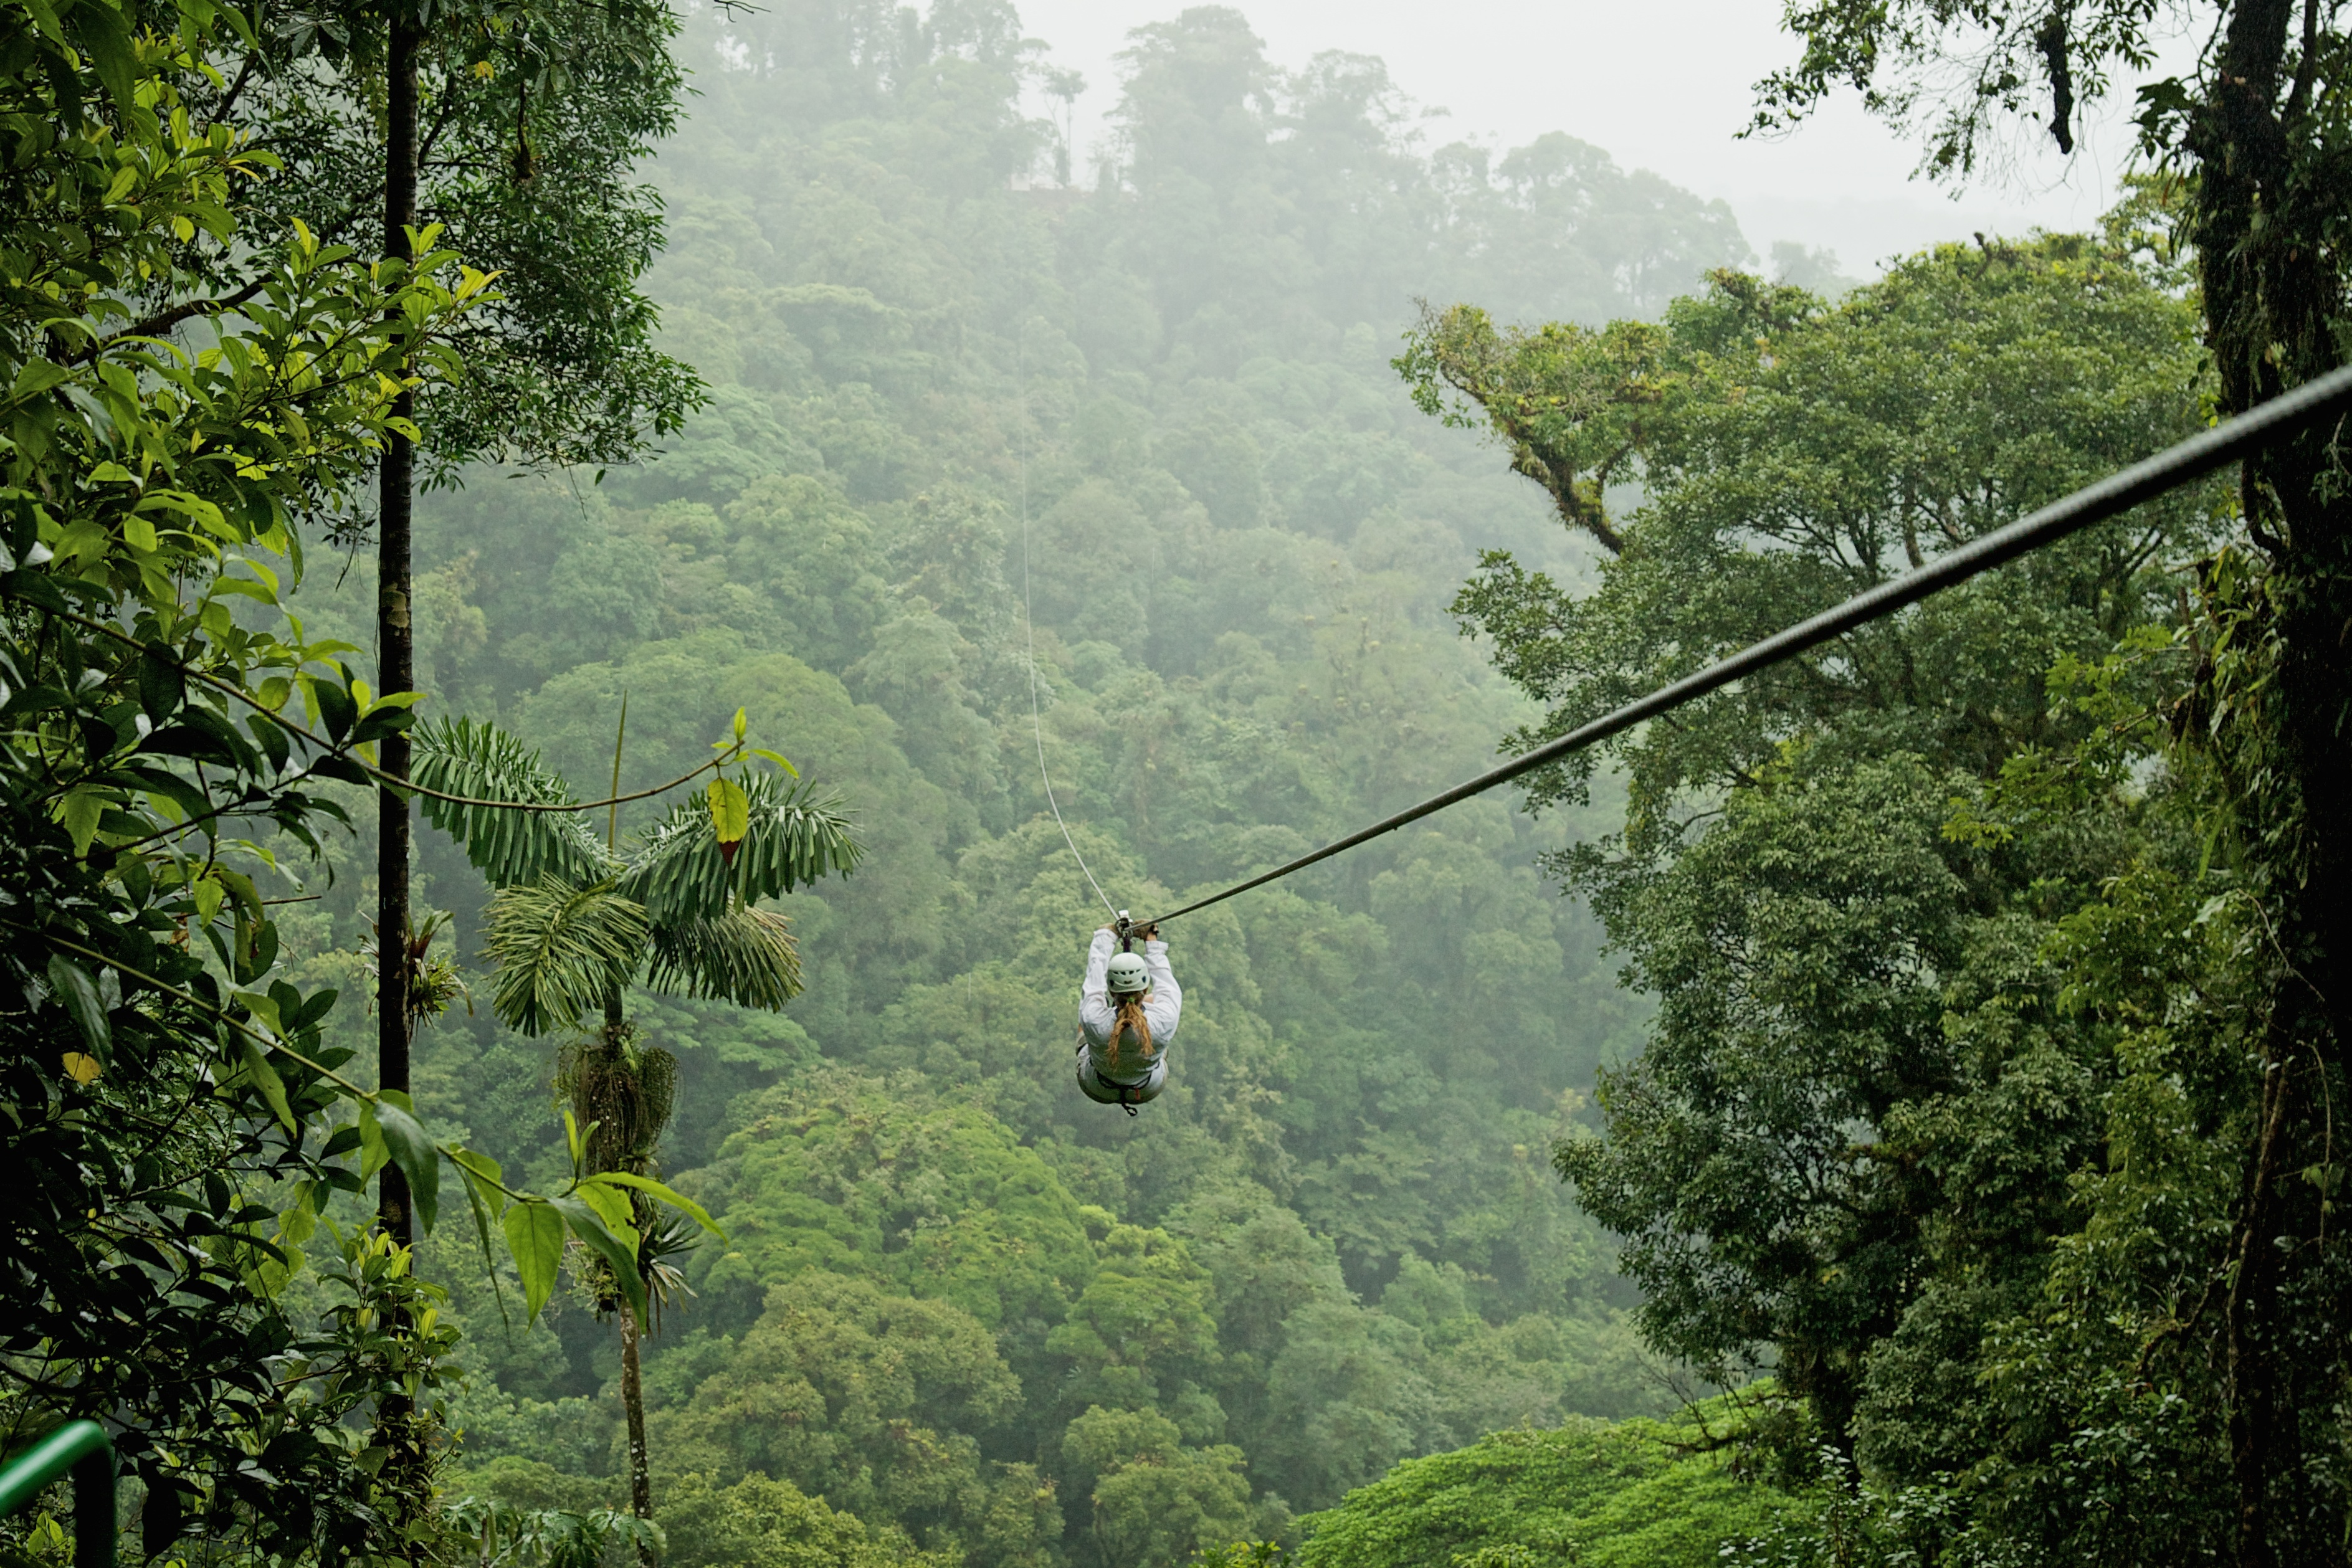 A person zip lining over trees and rainforest